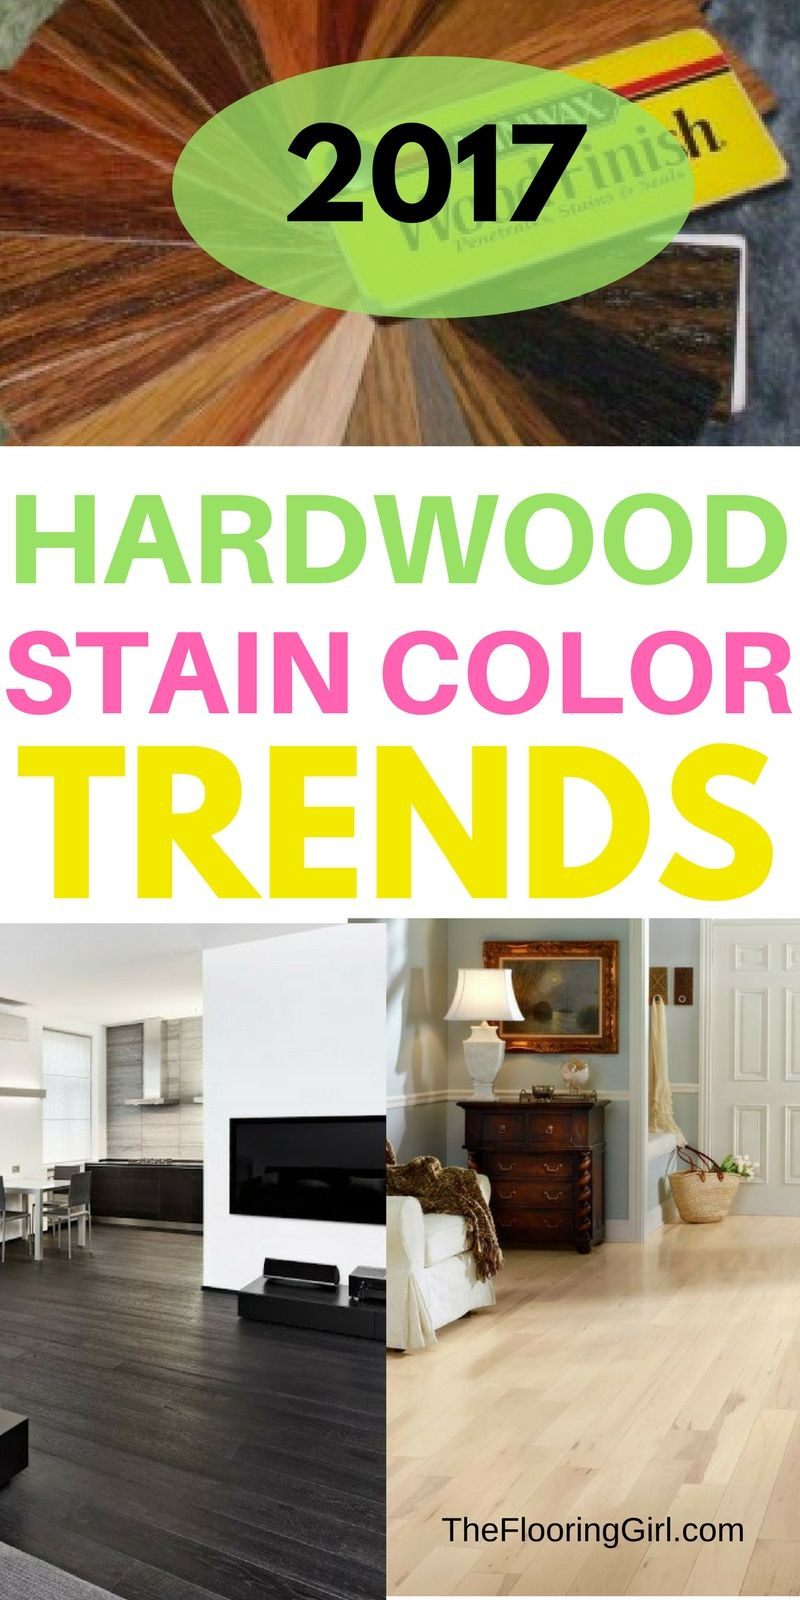 14 Stylish How to Sand and Refinish Hardwood Floors Yourself 2024 free download how to sand and refinish hardwood floors yourself of hardwood flooring stain color trends 2018 more from the flooring intended for hardwood flooring stain color trends for 2017 hardwood colo